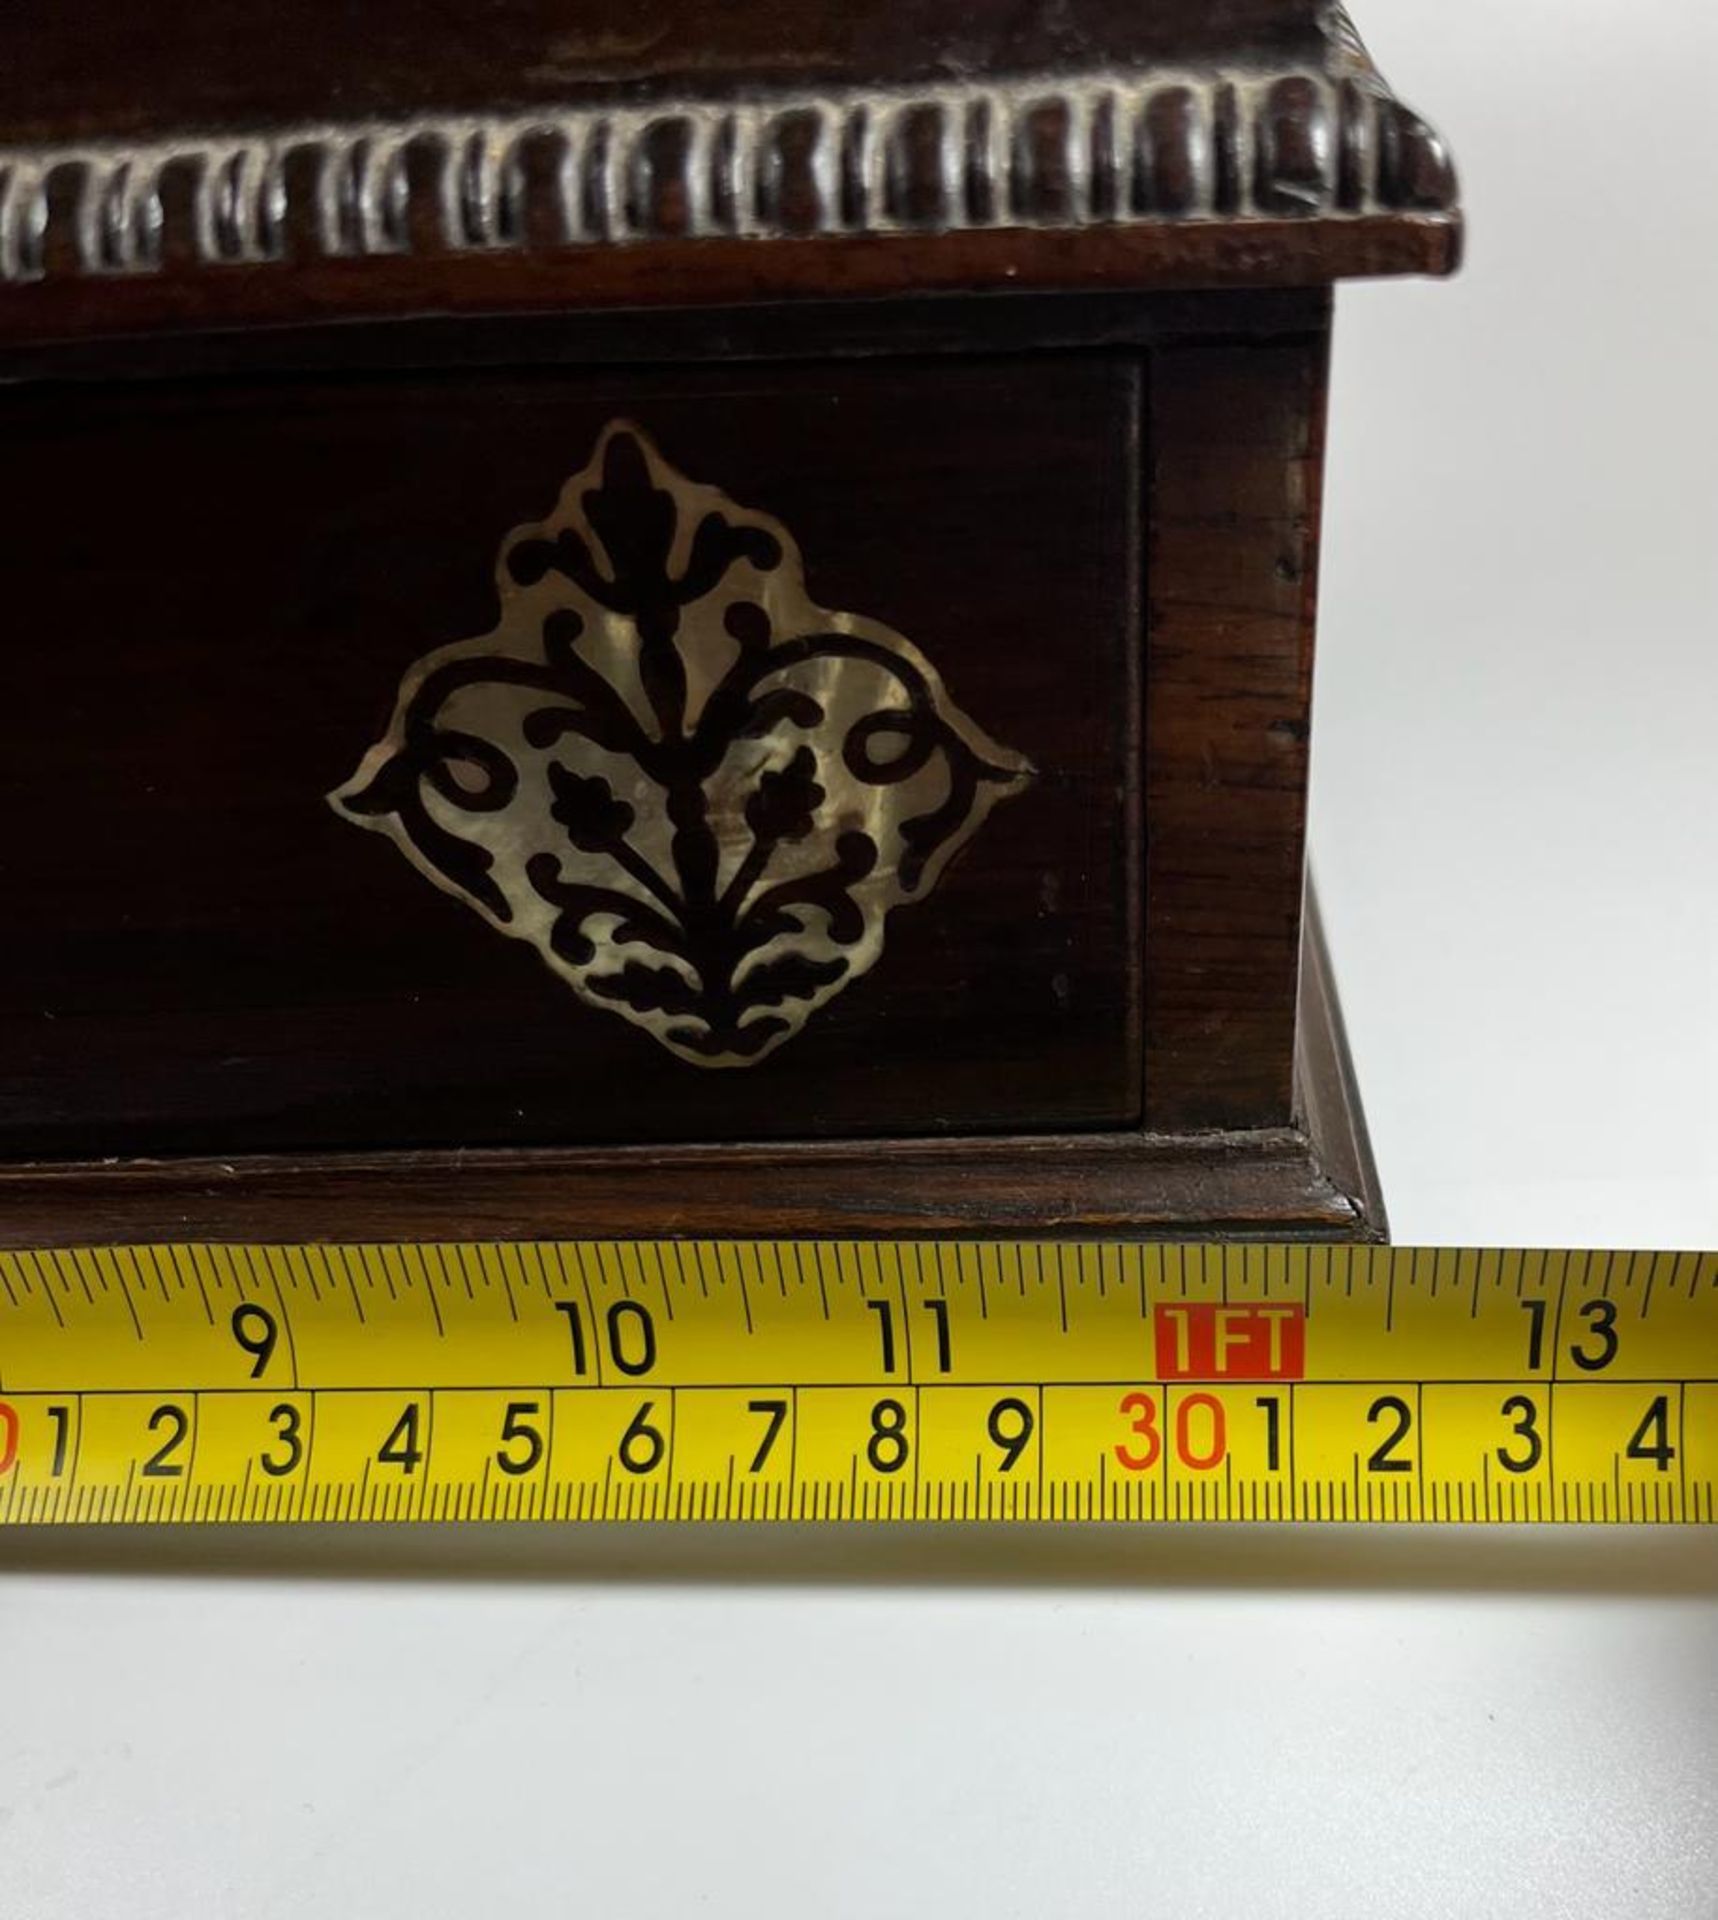 AN ANTIQUE 19TH CENTURY ROSEWOOD AND MOTHER OF PEARL INLAID JEWELLERY BOX WITH LIFT UP TOP SECTION - Image 7 of 8